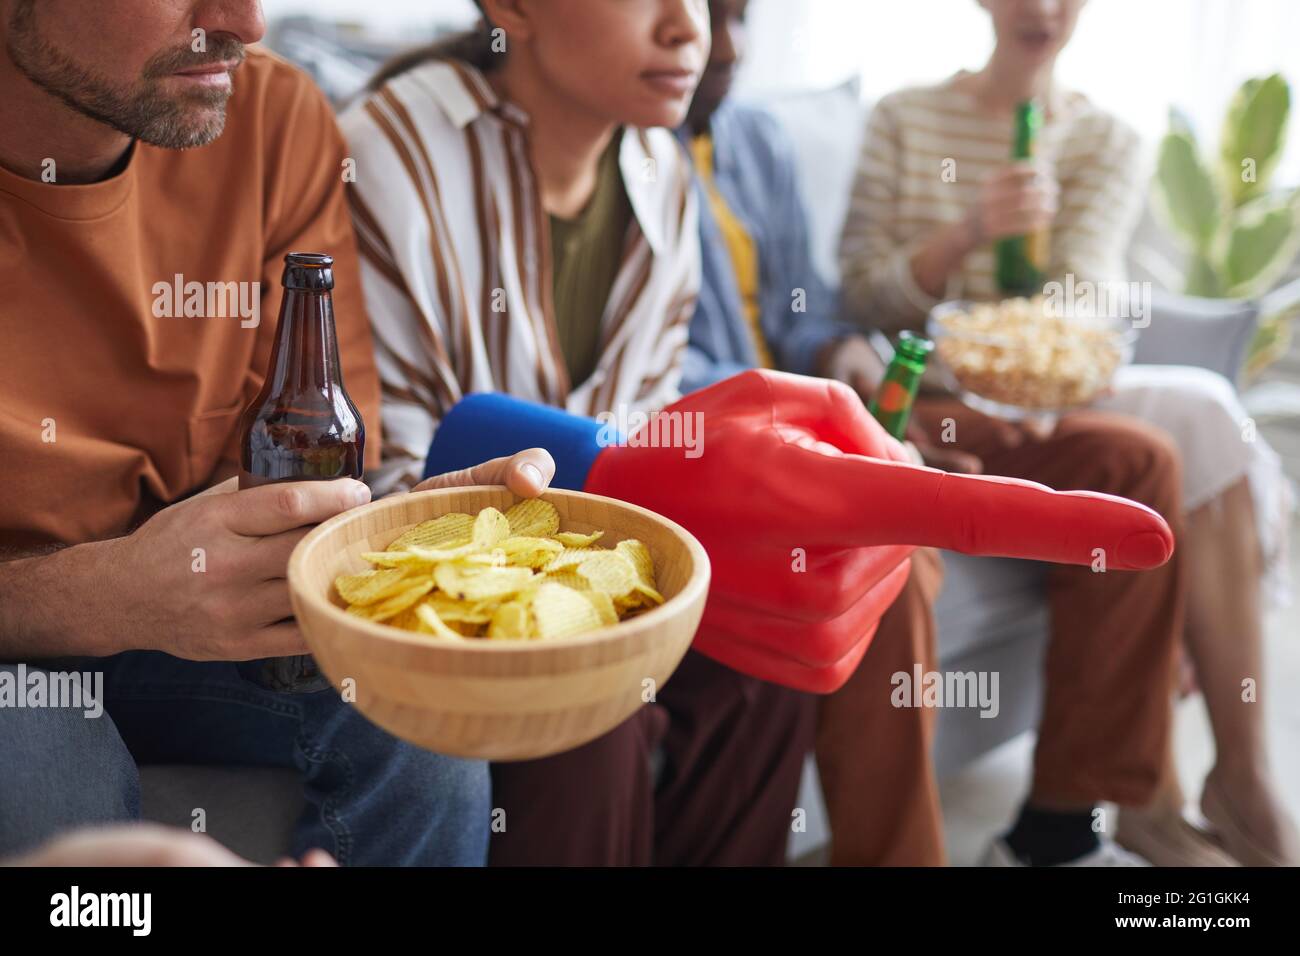 Close up of group of people holding snacks and fan gear while watching sports match together, copy space Stock Photo